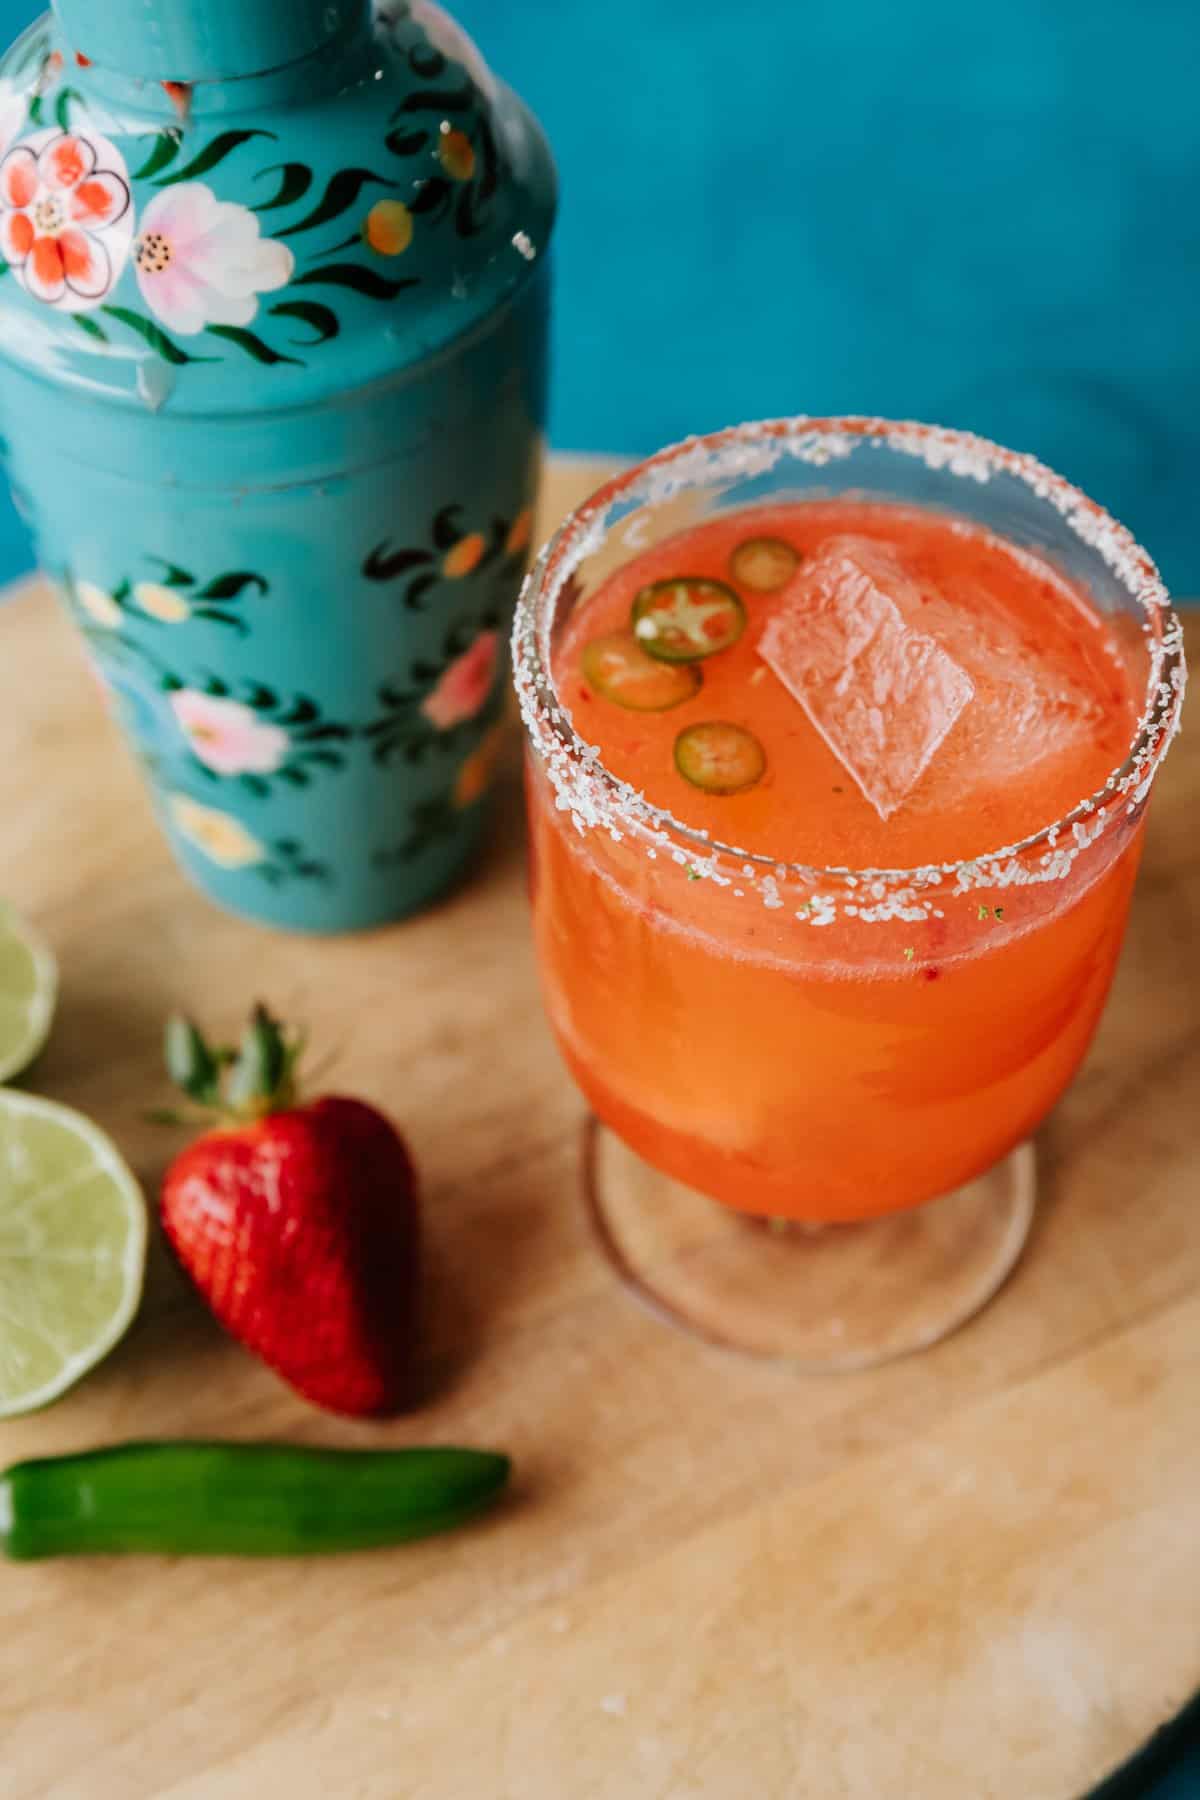 Strawberry jalapeño margarita on the rocks in a clear footed glass with a turquoise floral cocktail shaker in the background.